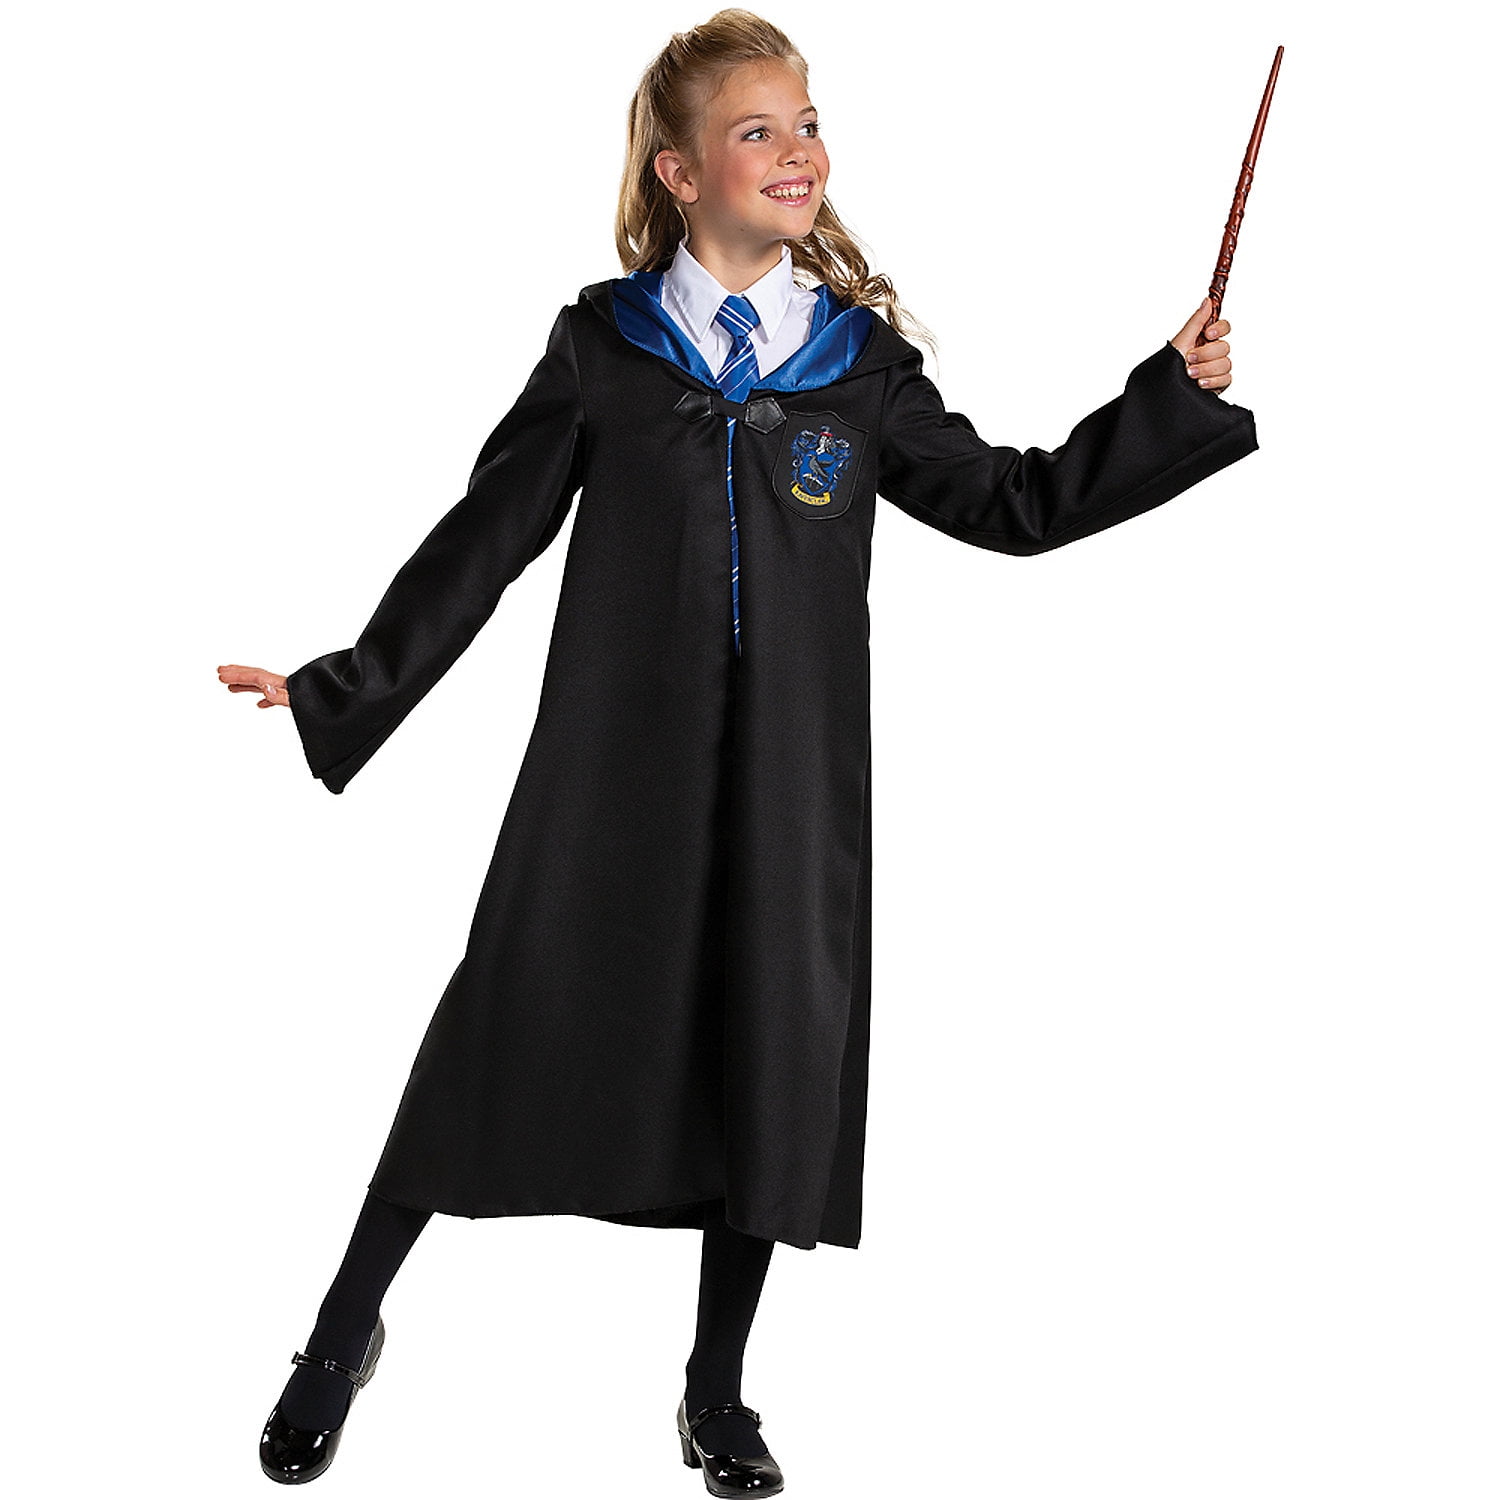 Disguise Kids' Deluxe Harry Potter Ravenclaw Robe Costume - Size 4-6 ...